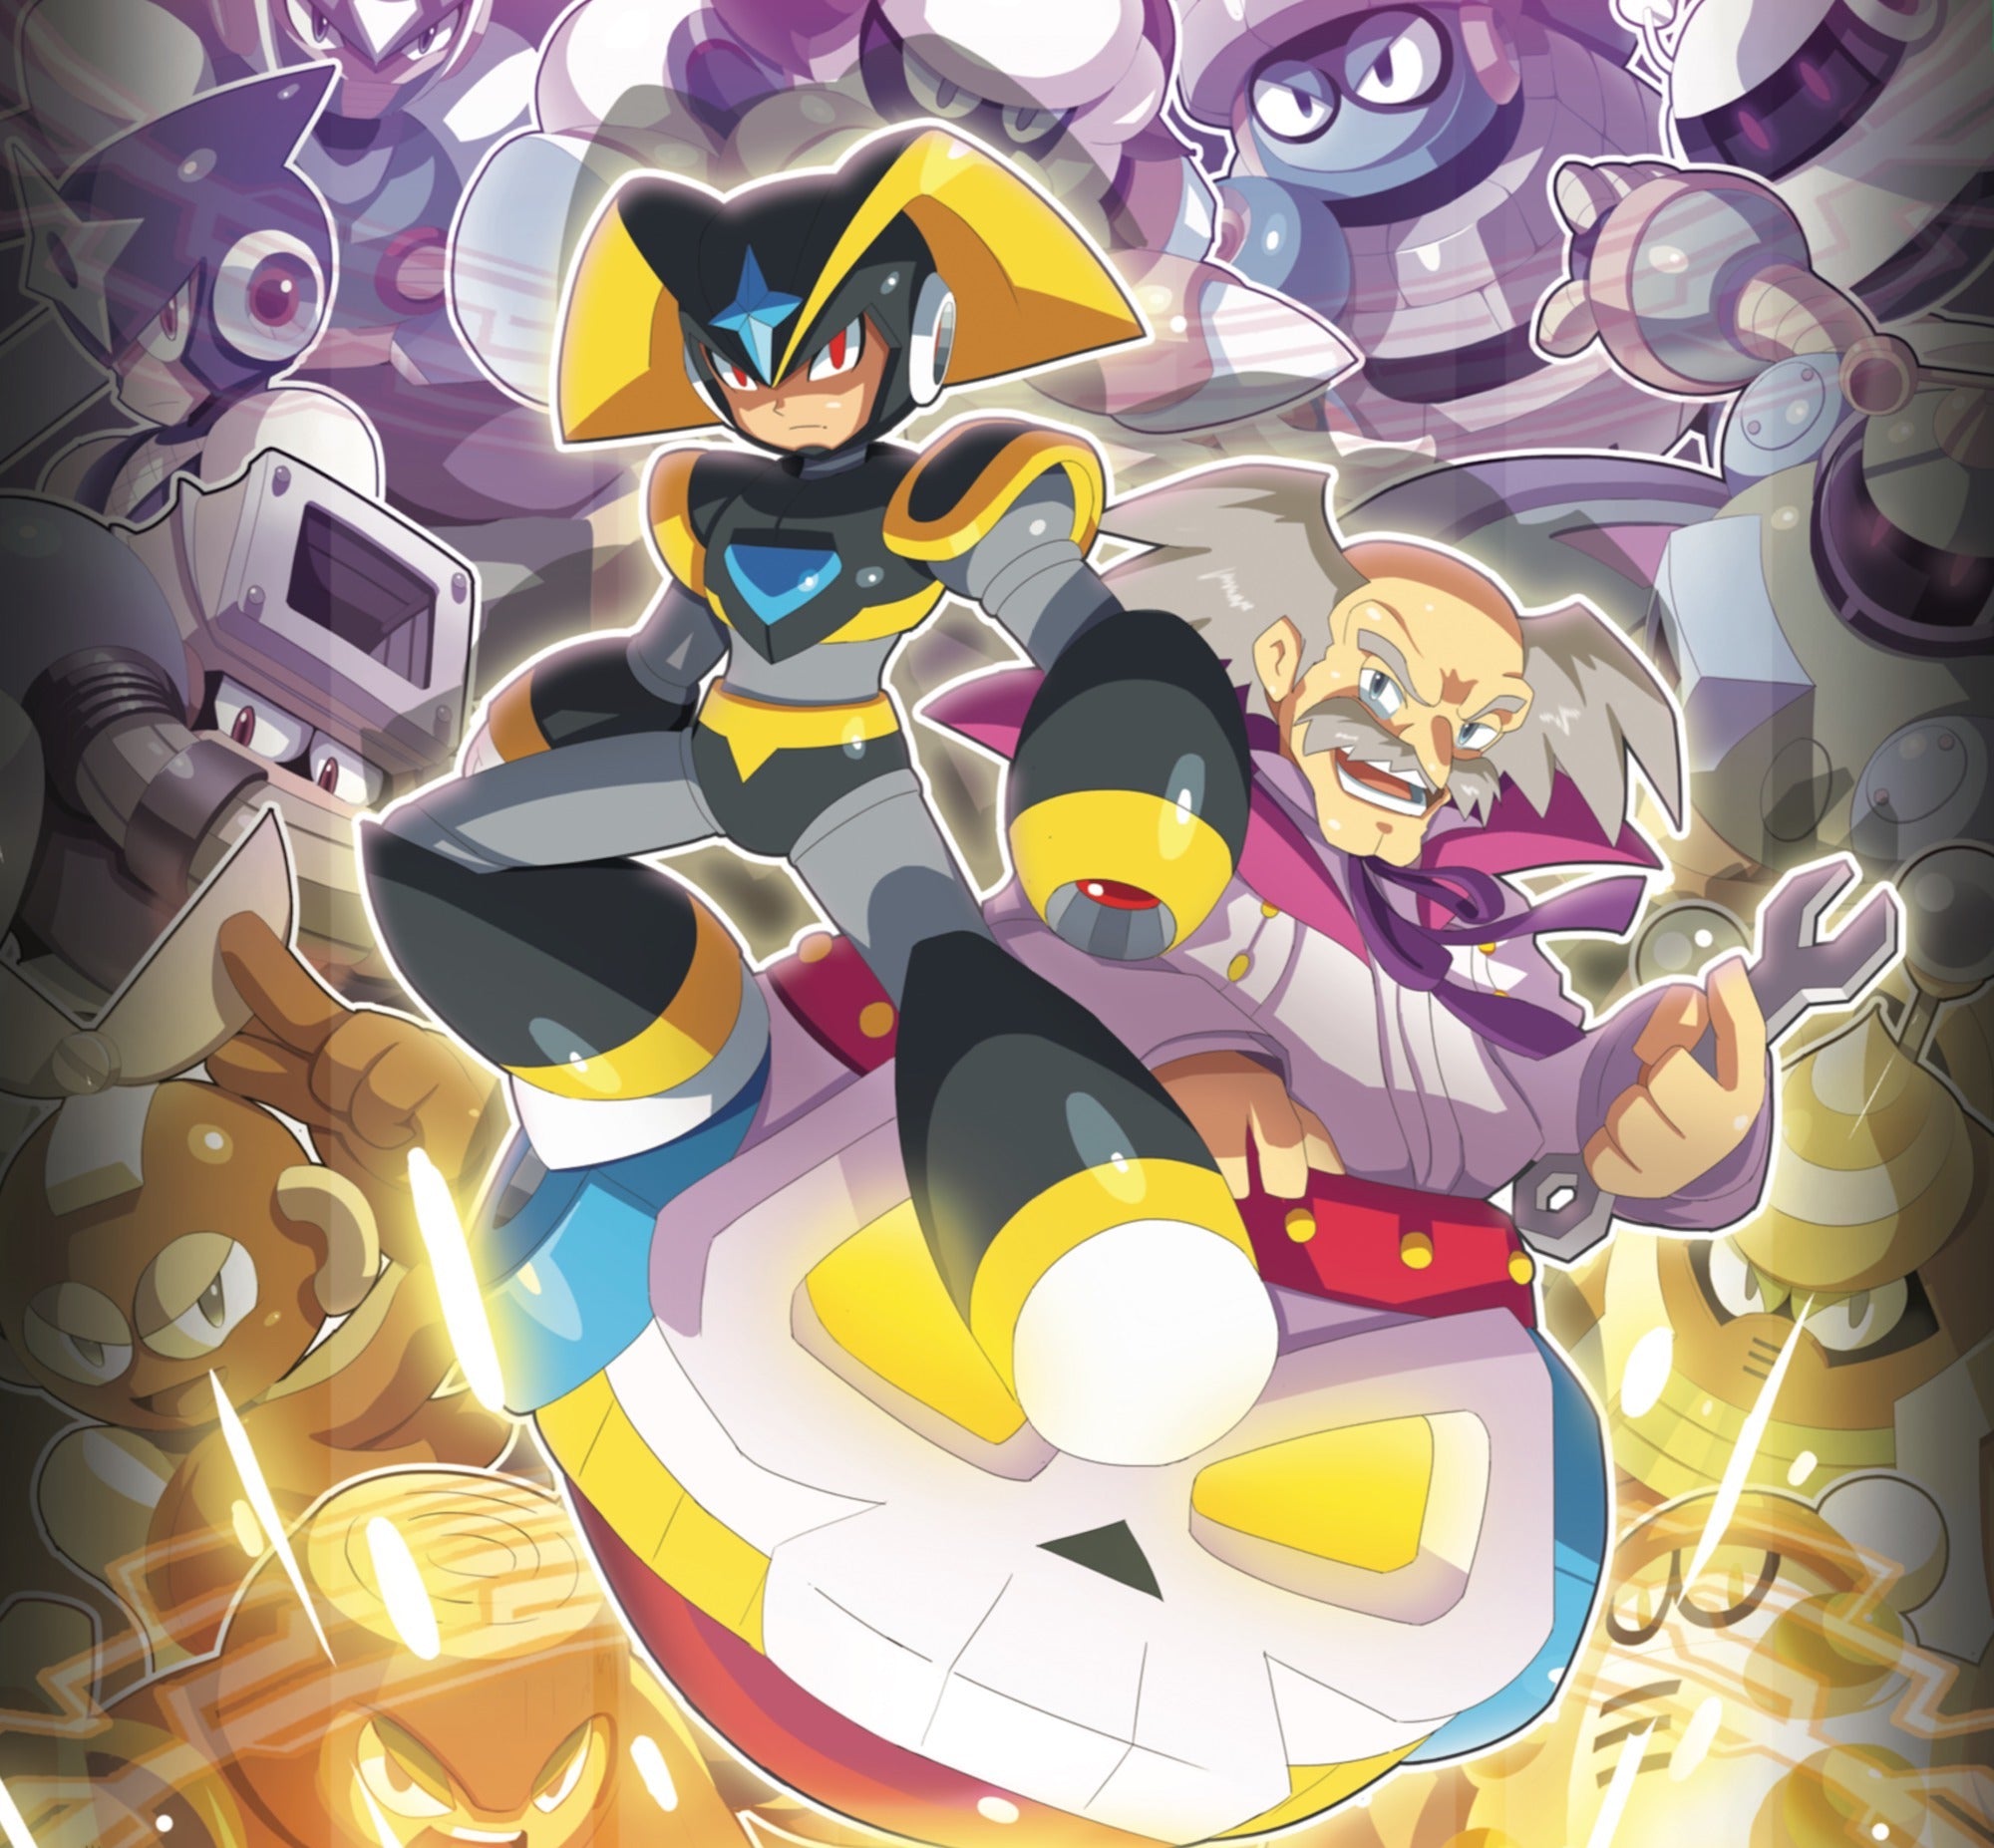 ultimatemaverickx’s outer sleeve back cover for the Mega Man 1-11: The Collection vinyl box set — “Evil Genius”. 